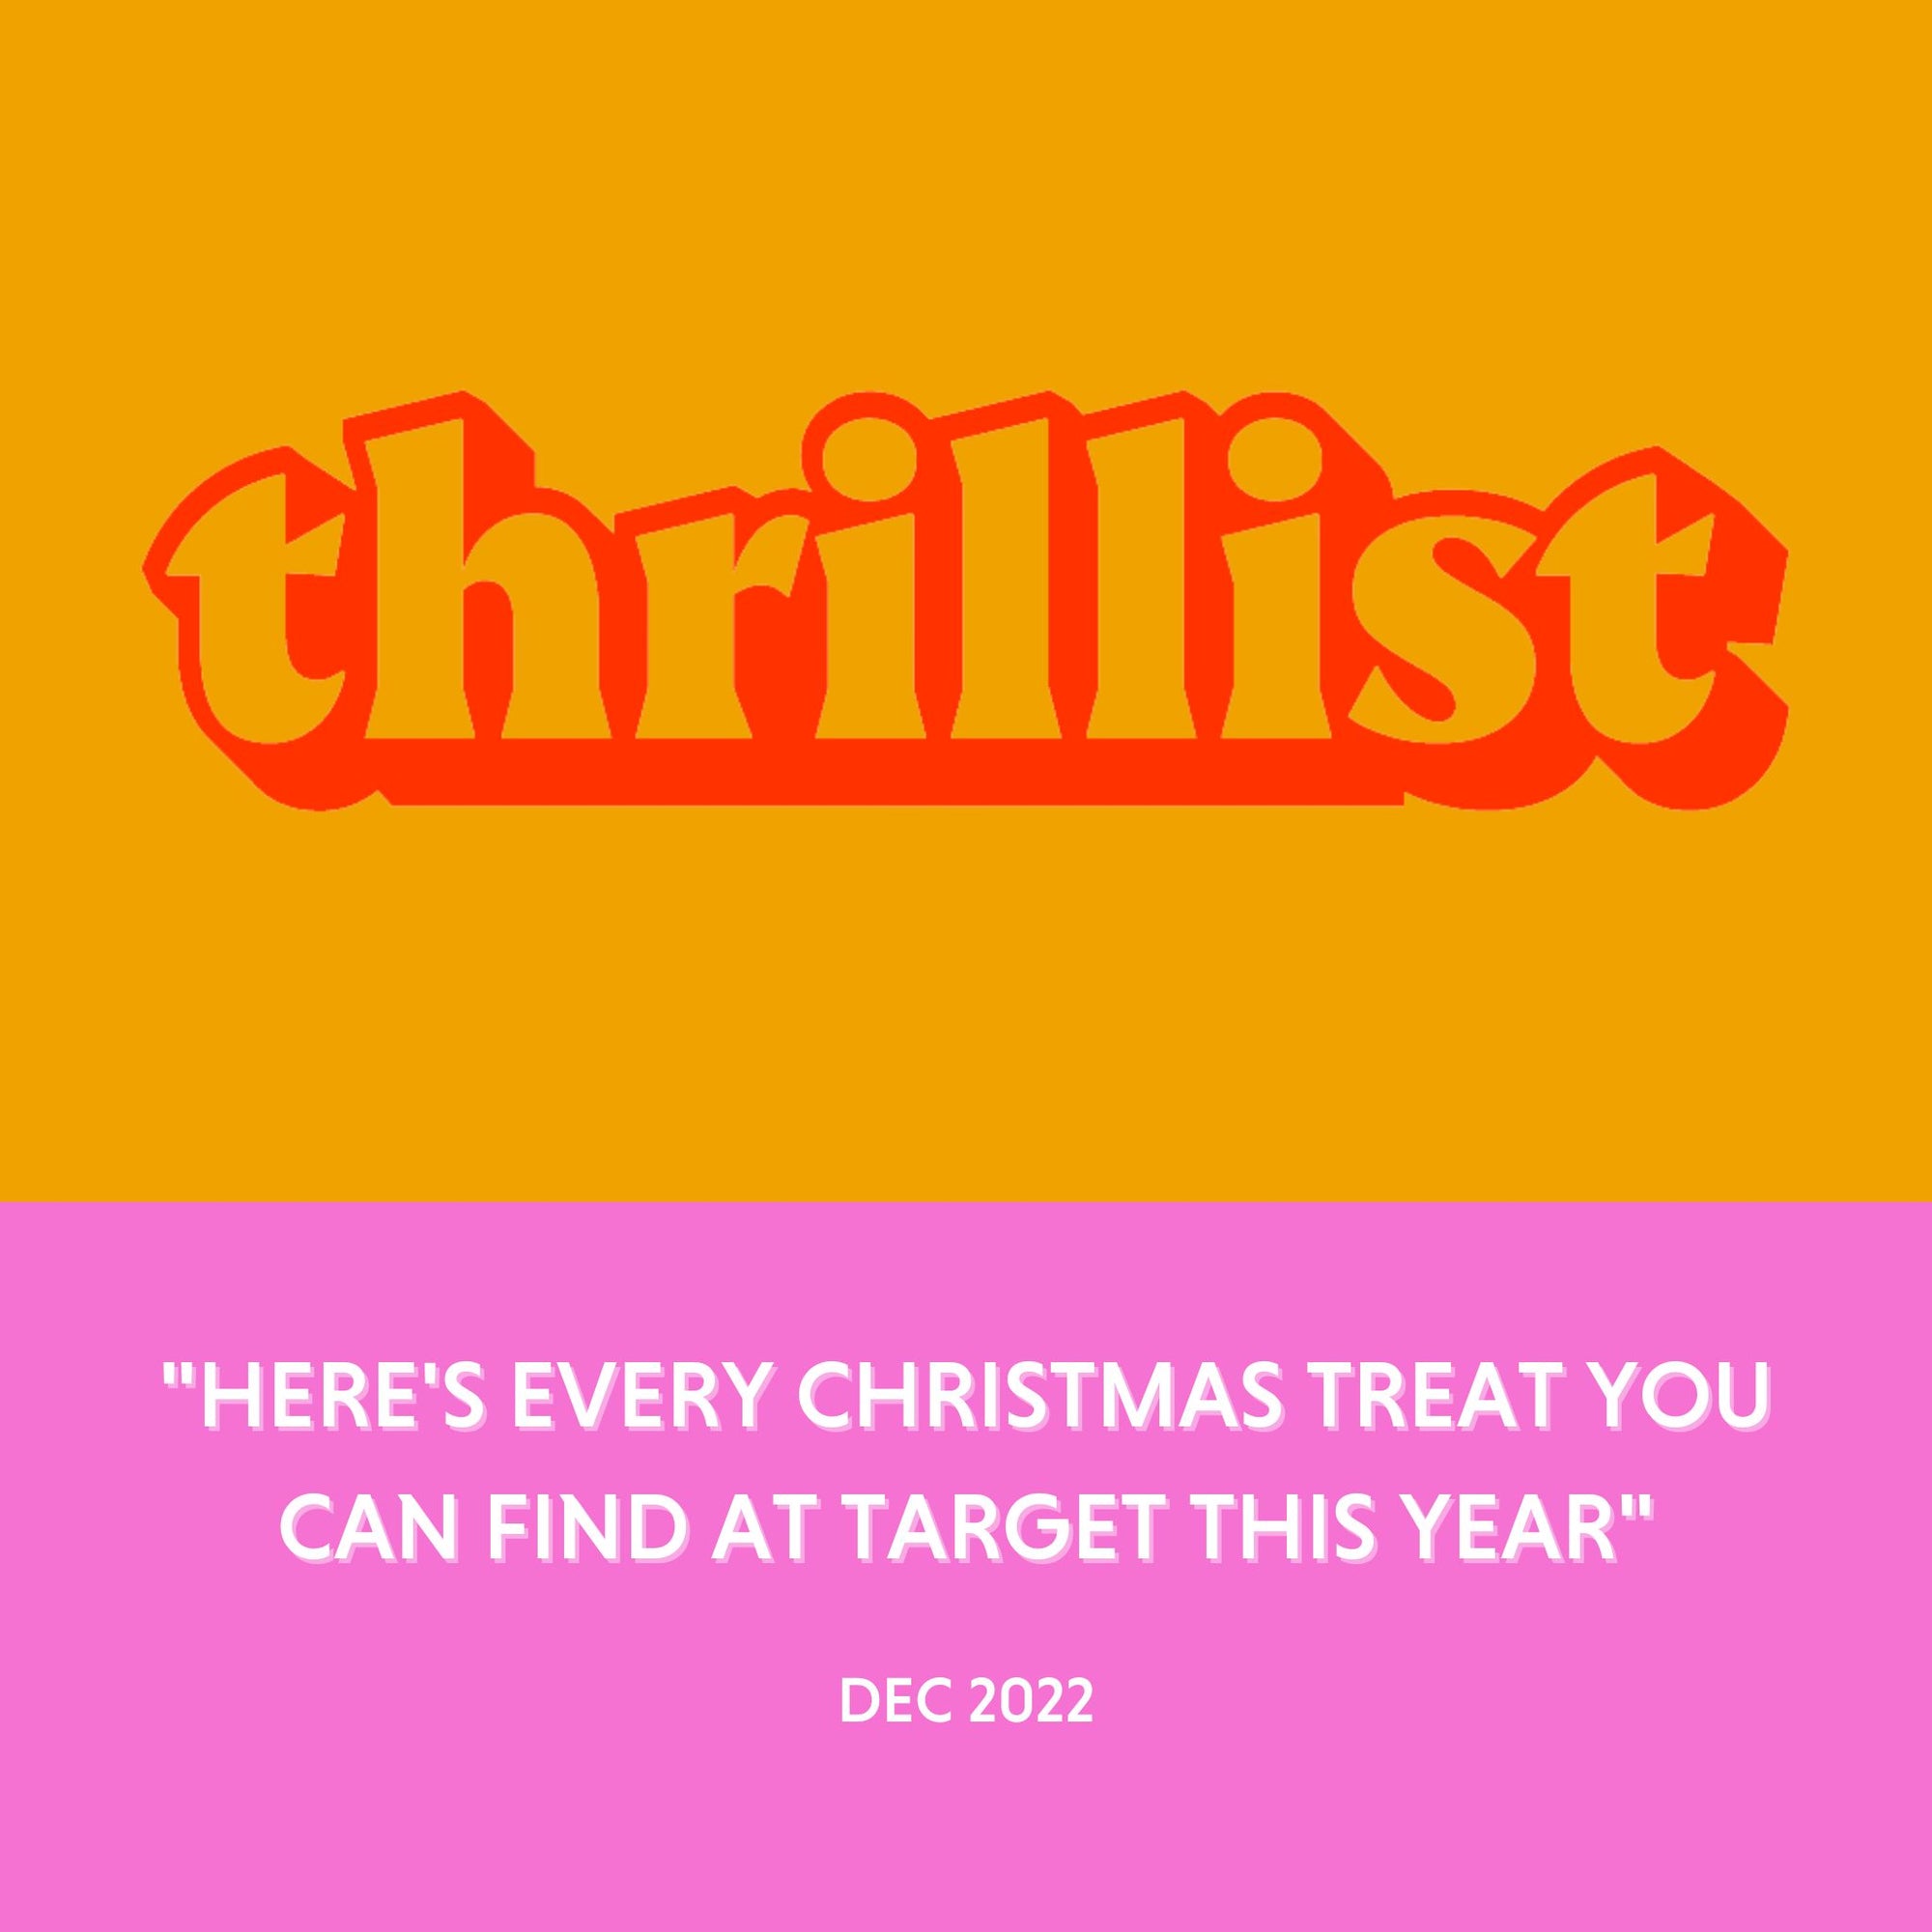 Thrillist - "Here's Every Christmas Treat You Can Find at Target This Year" - Dec 2022